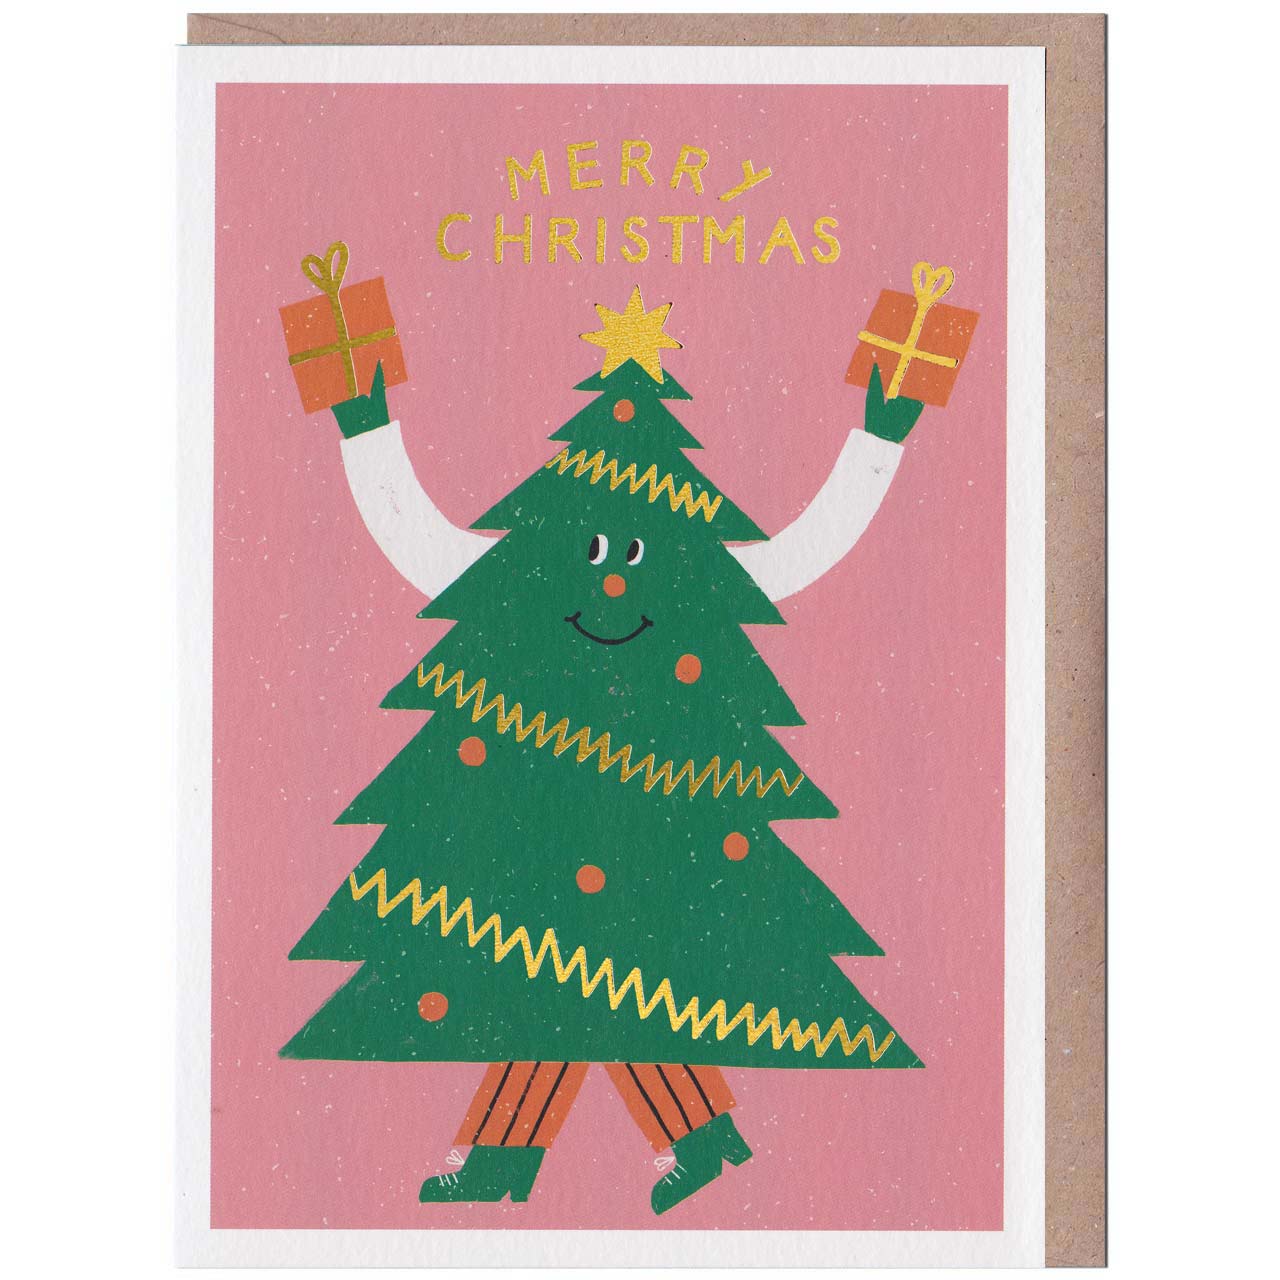 Merry Christmas Happy Tree Gold Foil Card